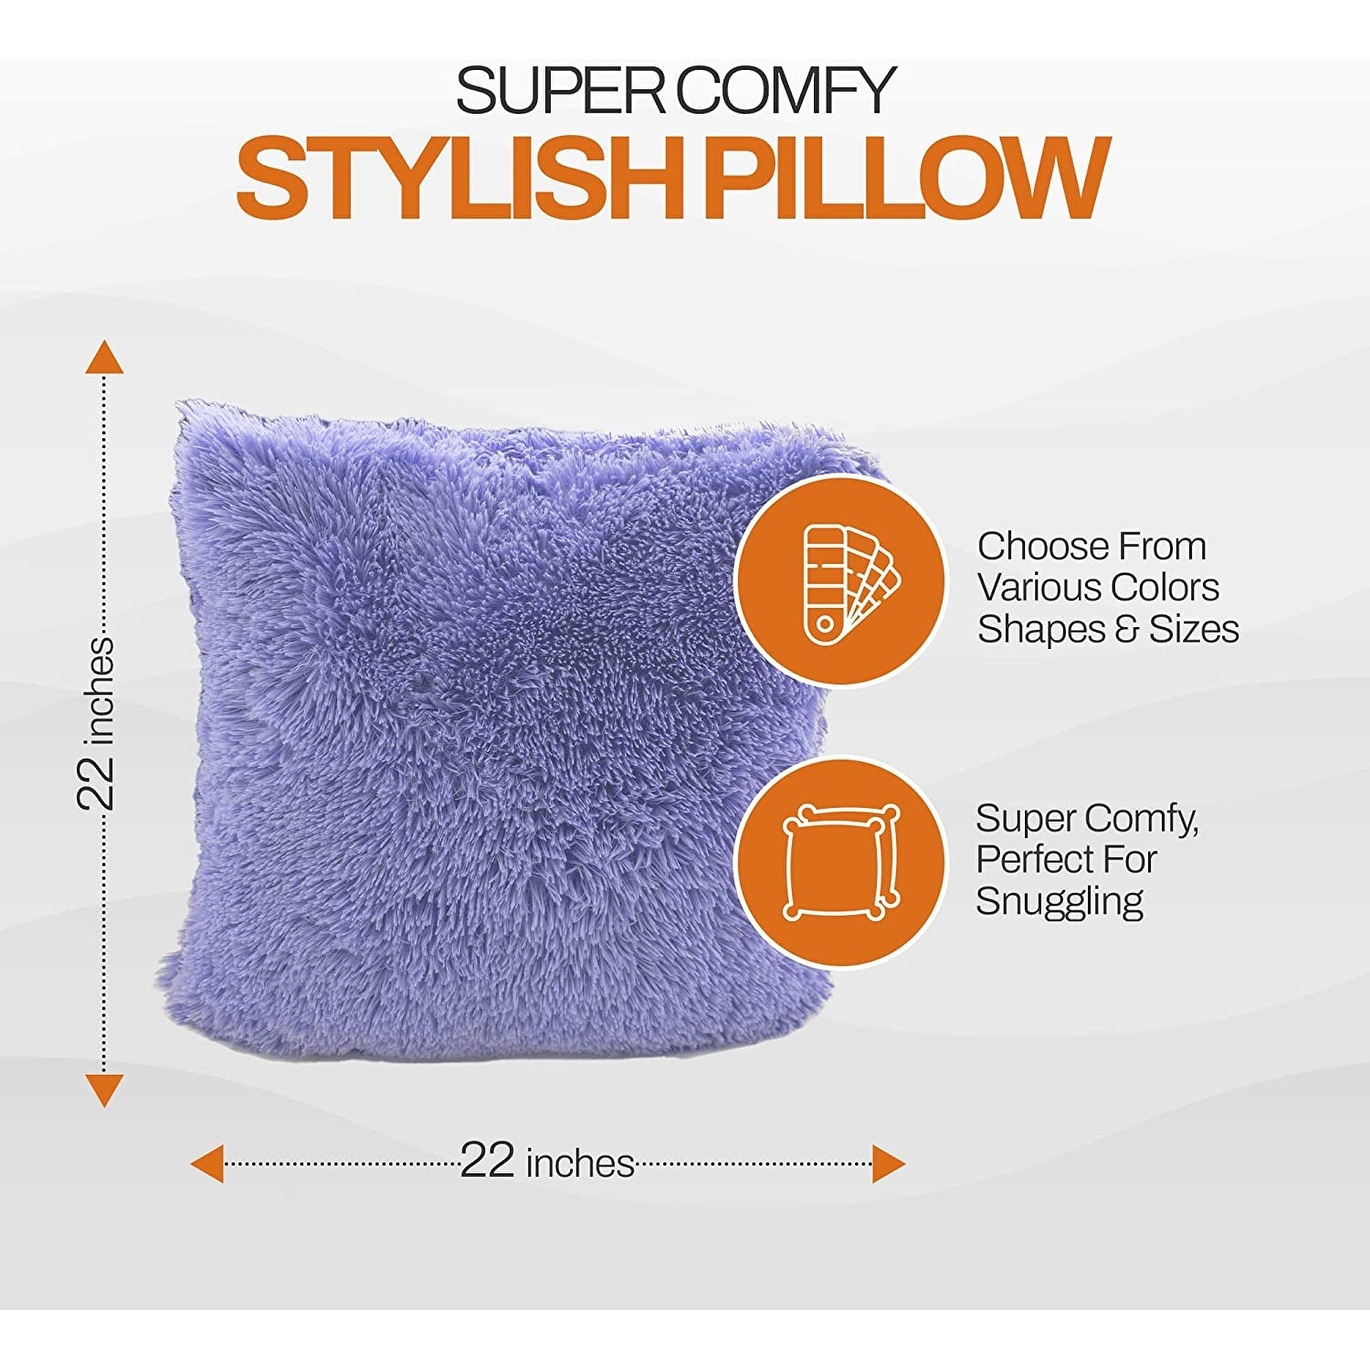 Cheer Collection Set of 2 Shaggy Long Hair Throw Pillows - Purple - 18 x 18 in